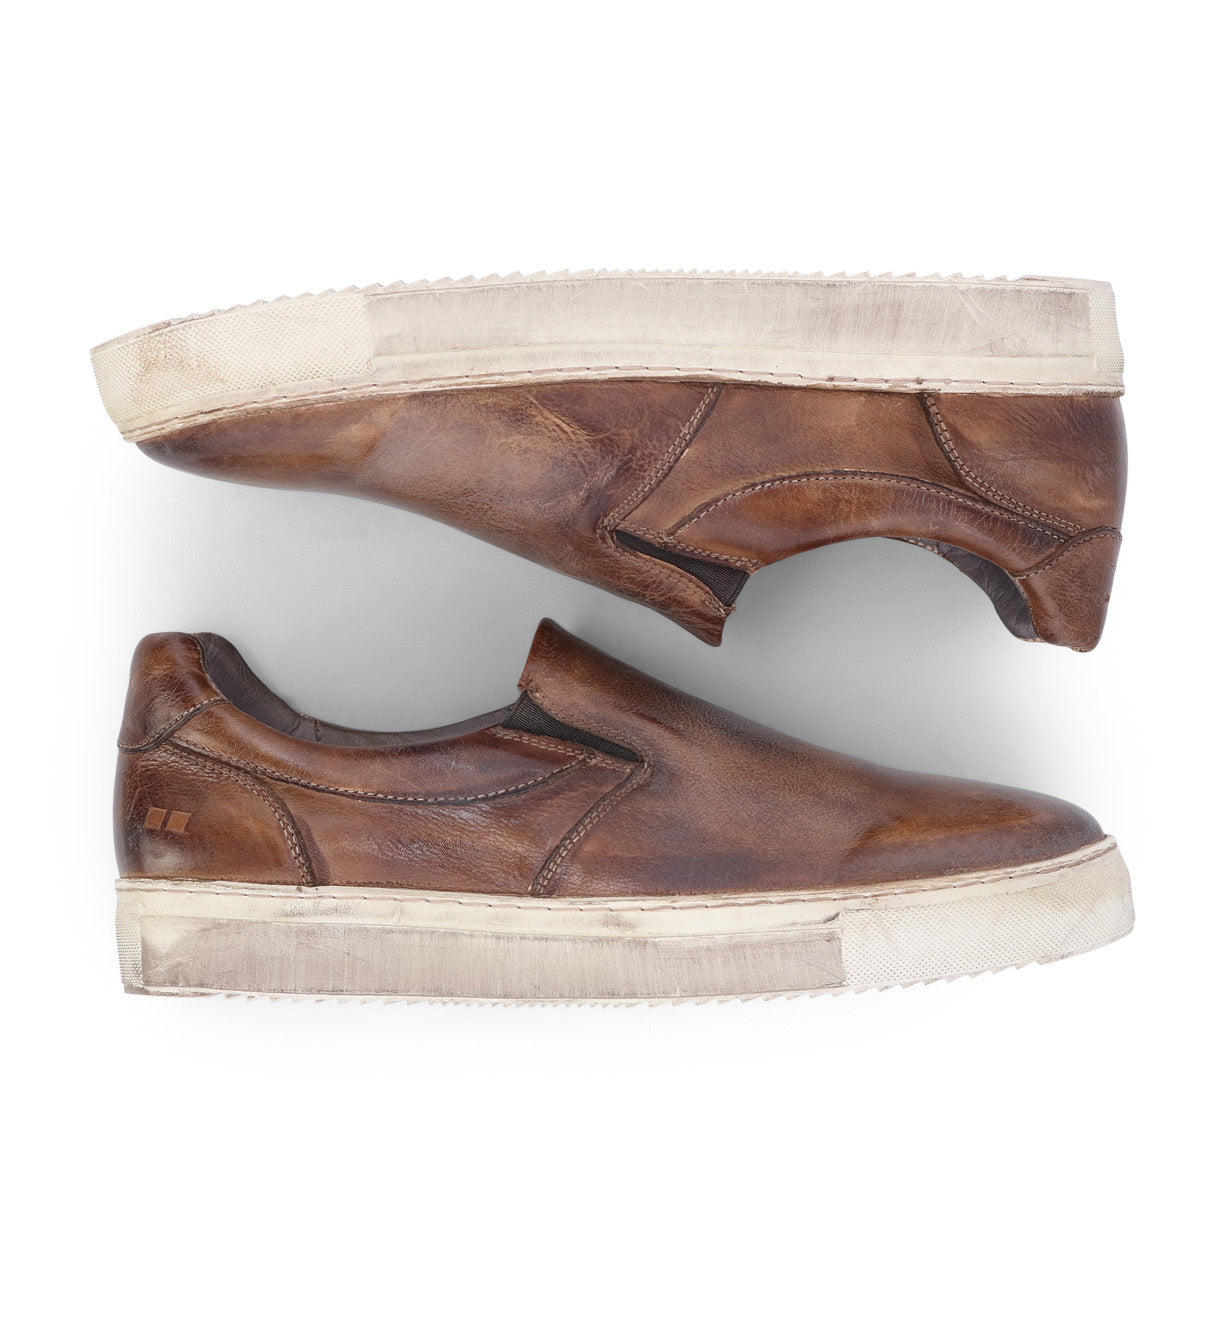 A pair of Bed Stu Harry brown leather slip on sneakers.